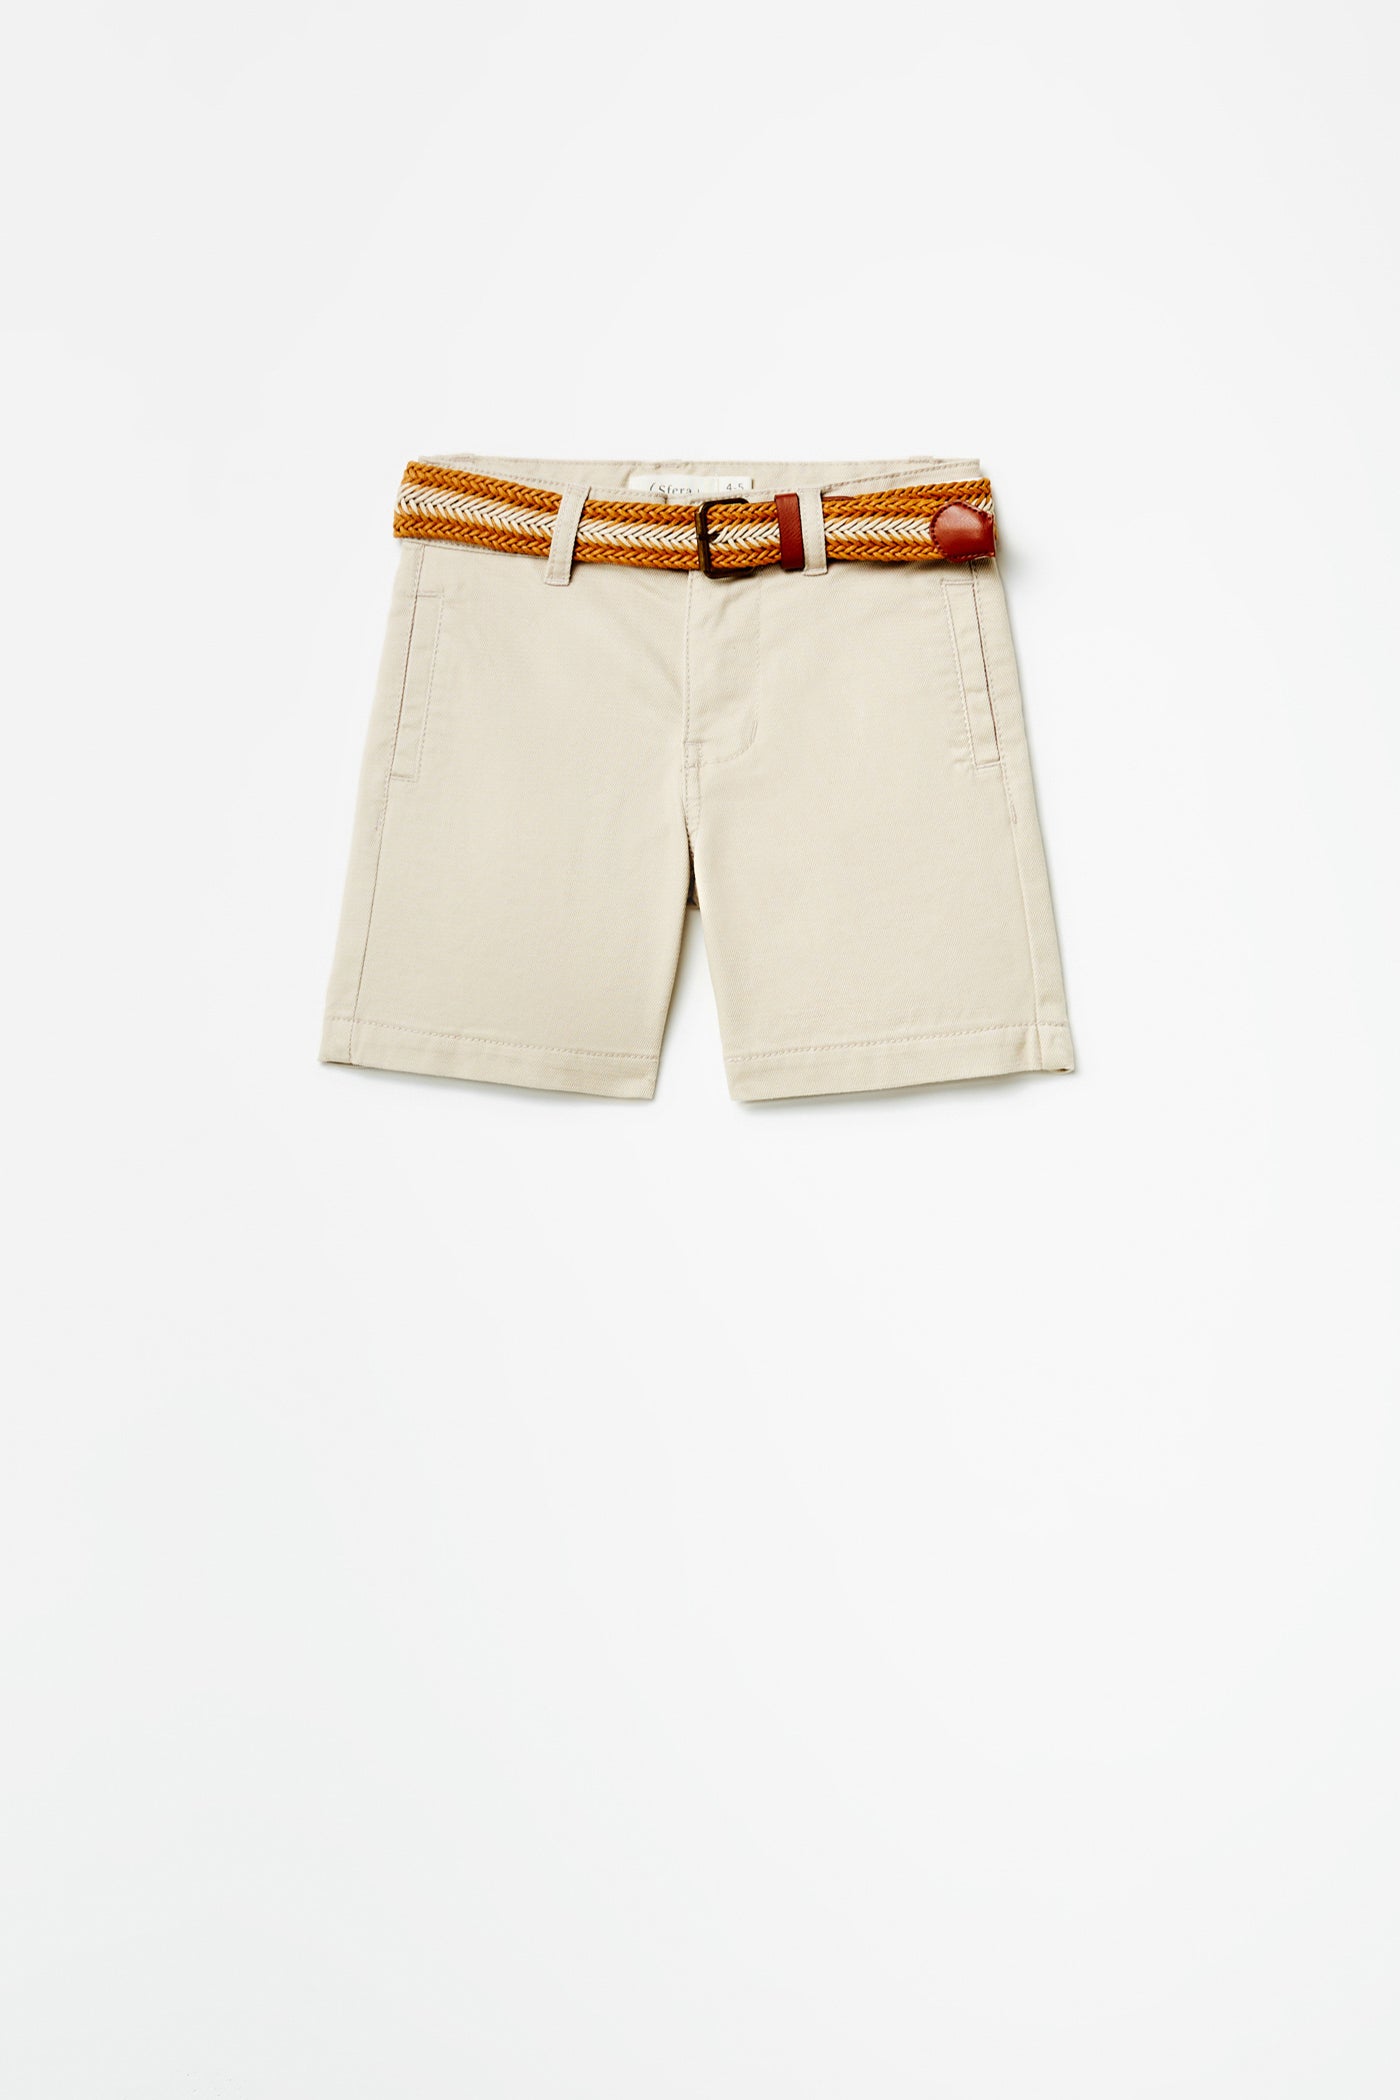 Sfera Formal Shorts With Belt - Beige / Camel 3 Shaws Department Stores